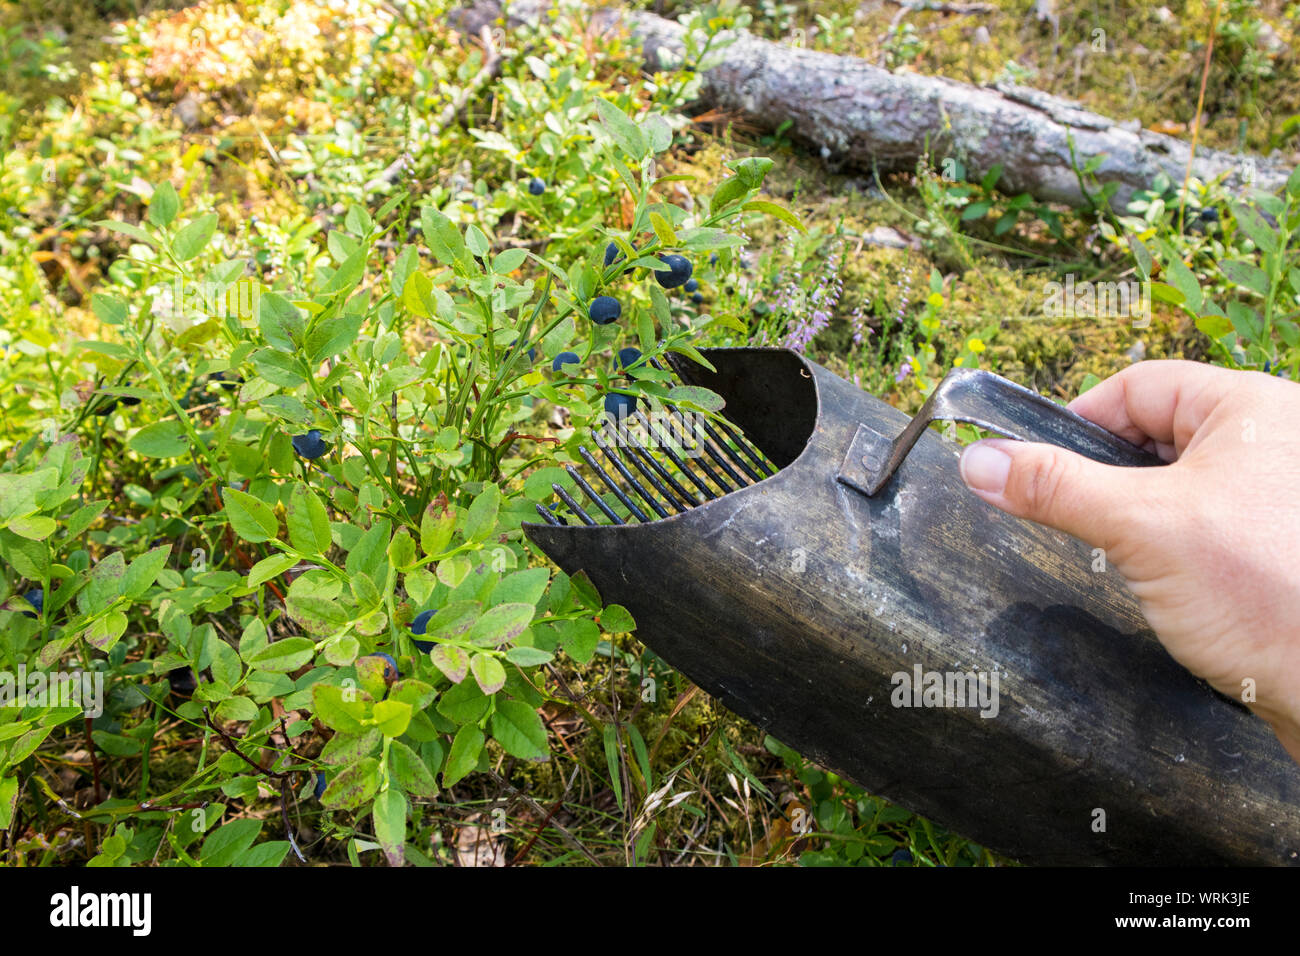 Close up view of person hand using berry picker hand tool to pick faster wild organic blueberries in natural Nordic pine tree forest in summer. Stock Photo